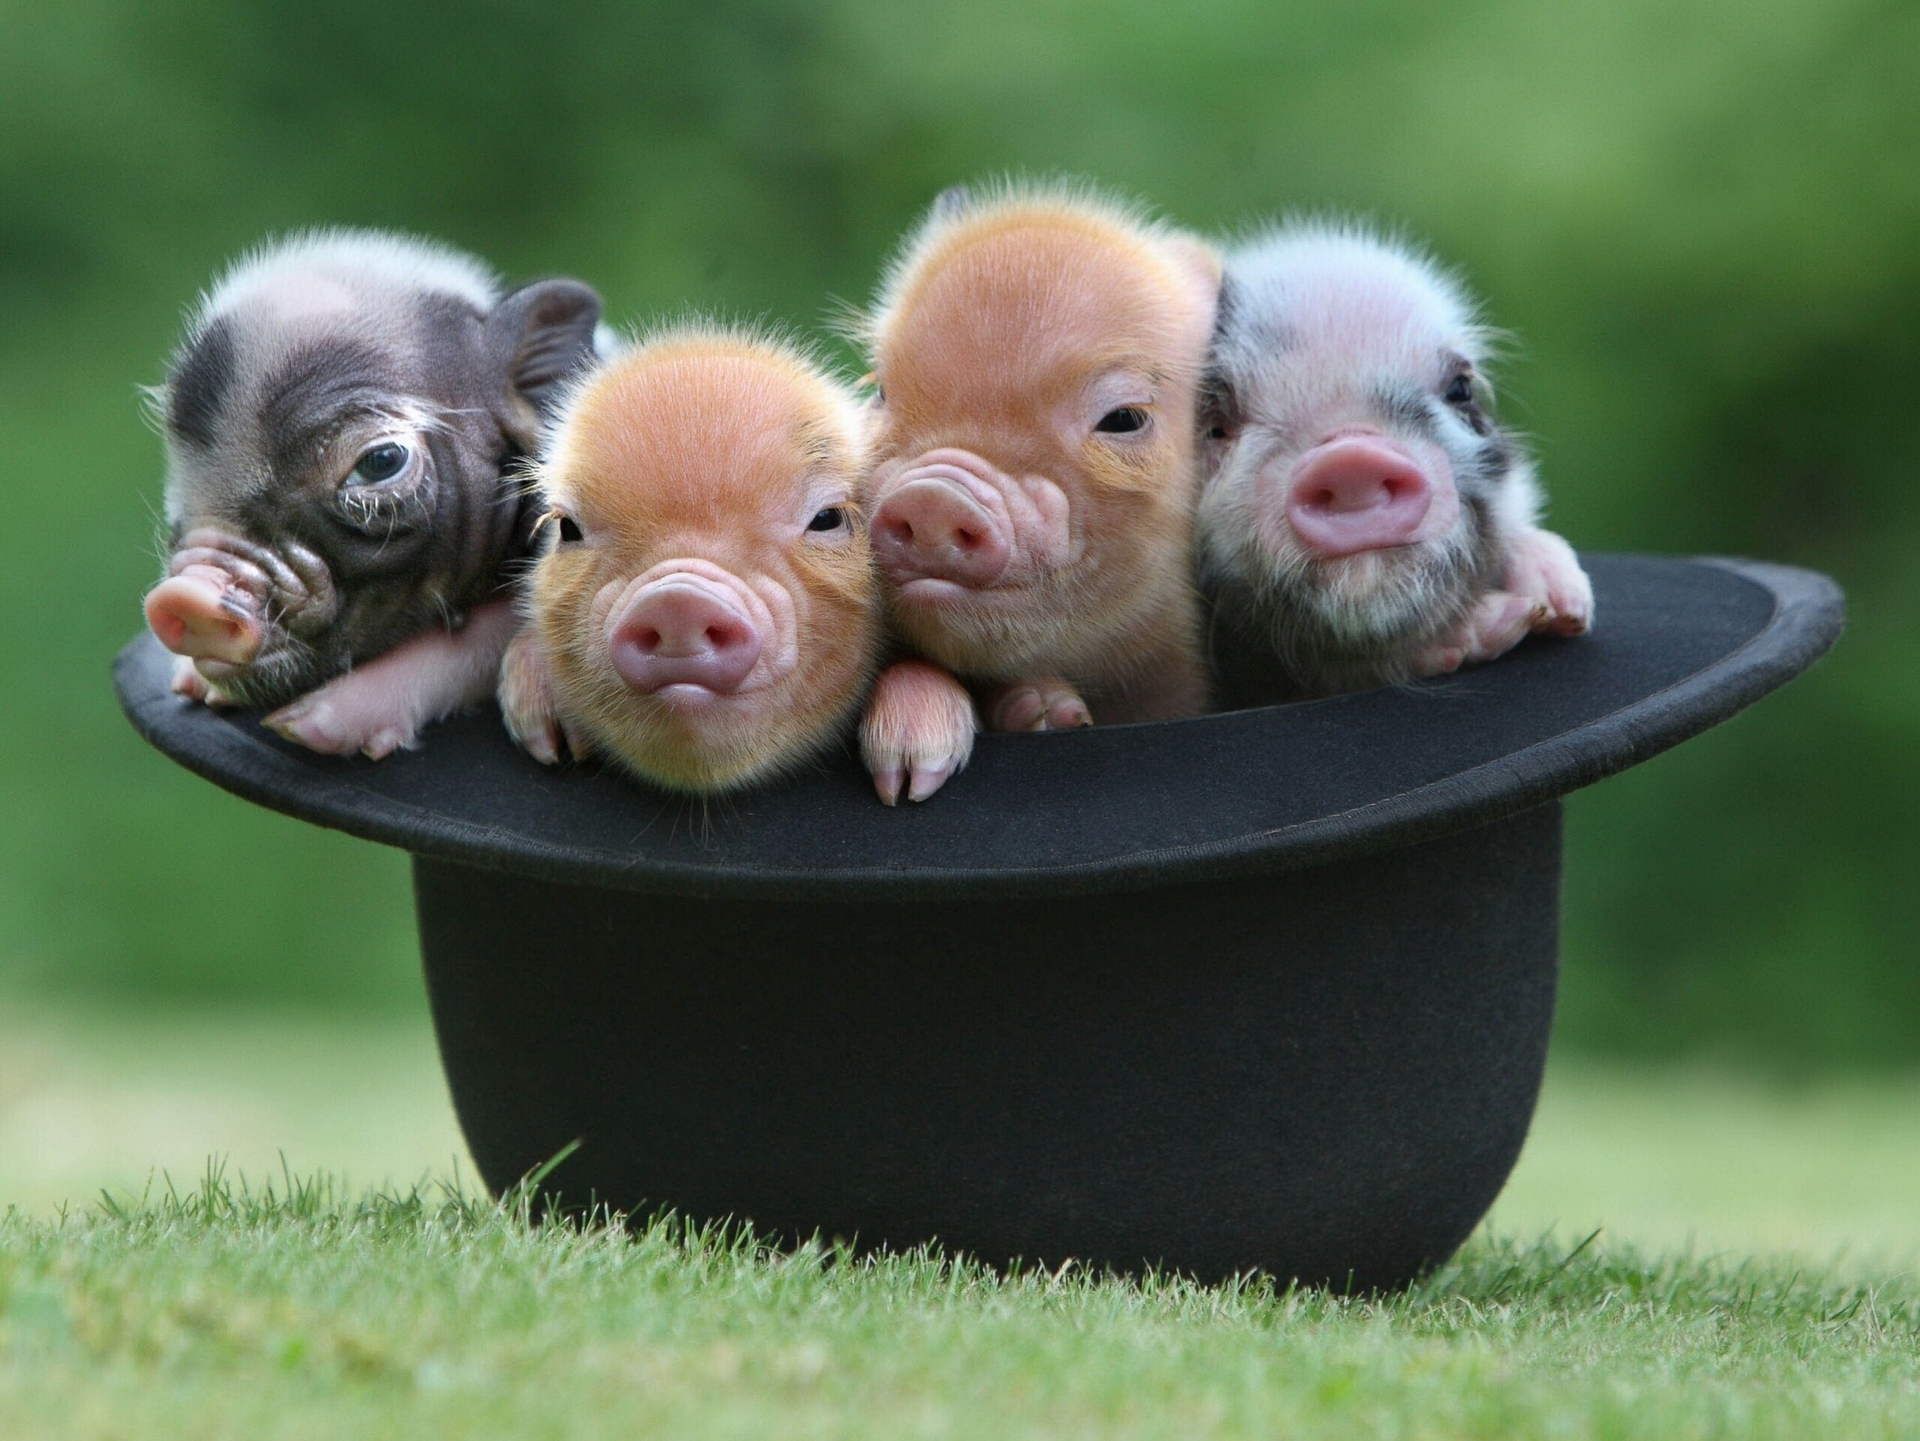 Download wallpaper hat, Quartet, pigs, section animals in resolution 1920x1...